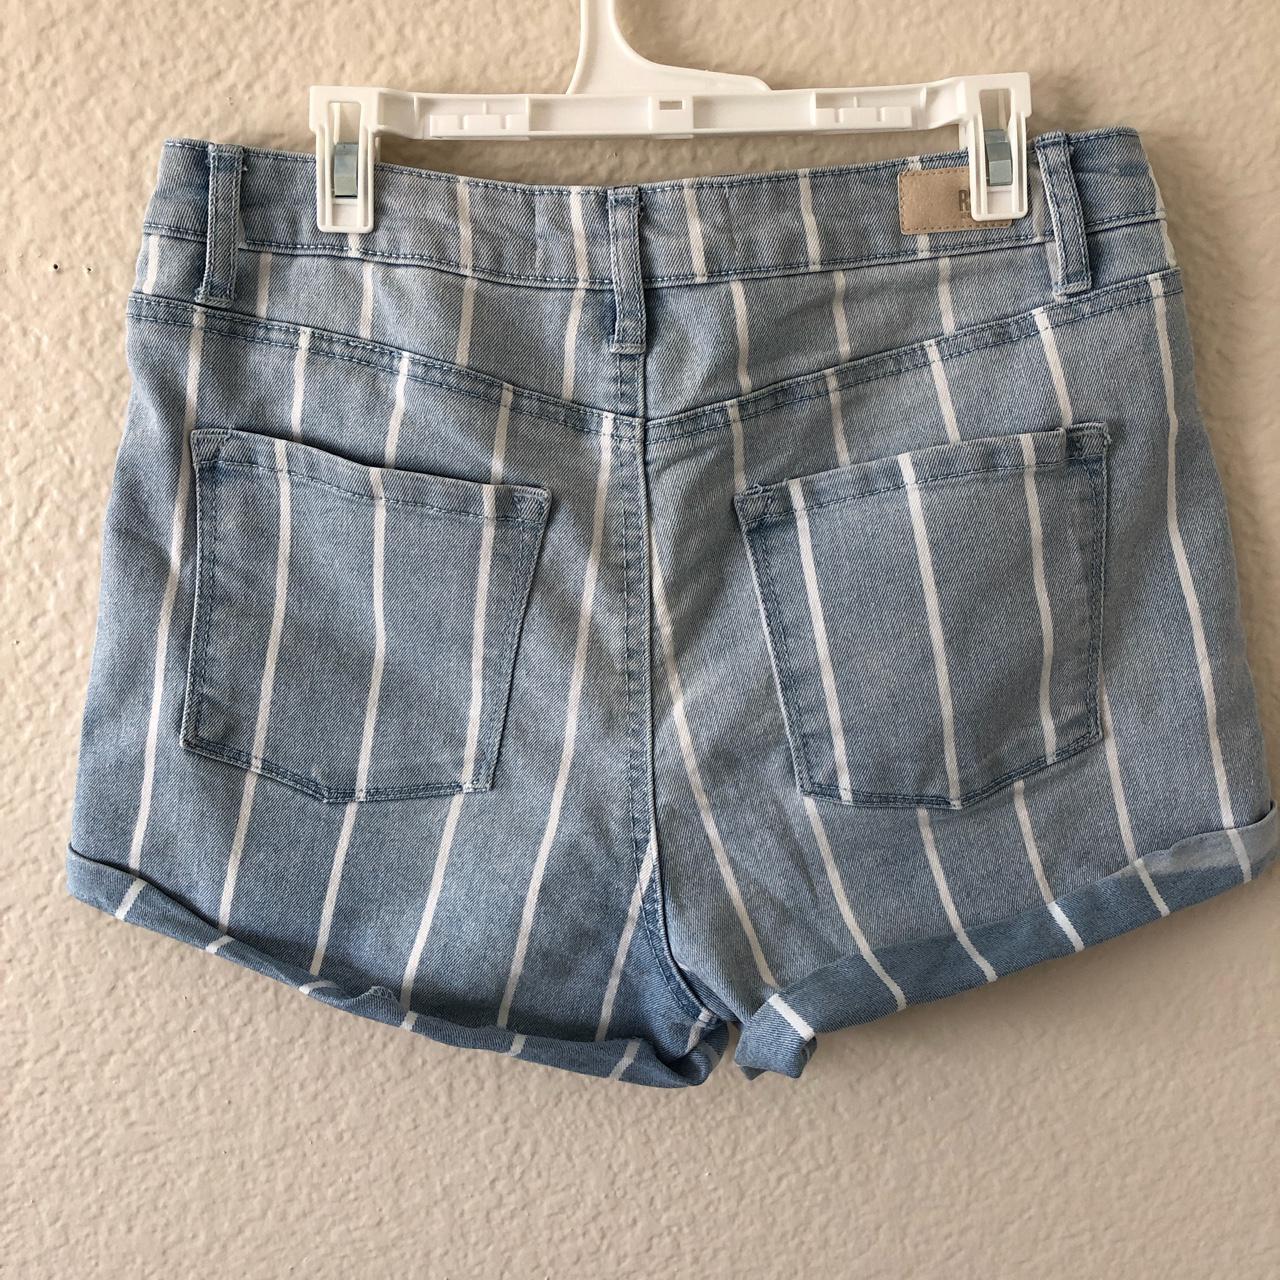 PacSun Women's Blue and White Shorts | Depop